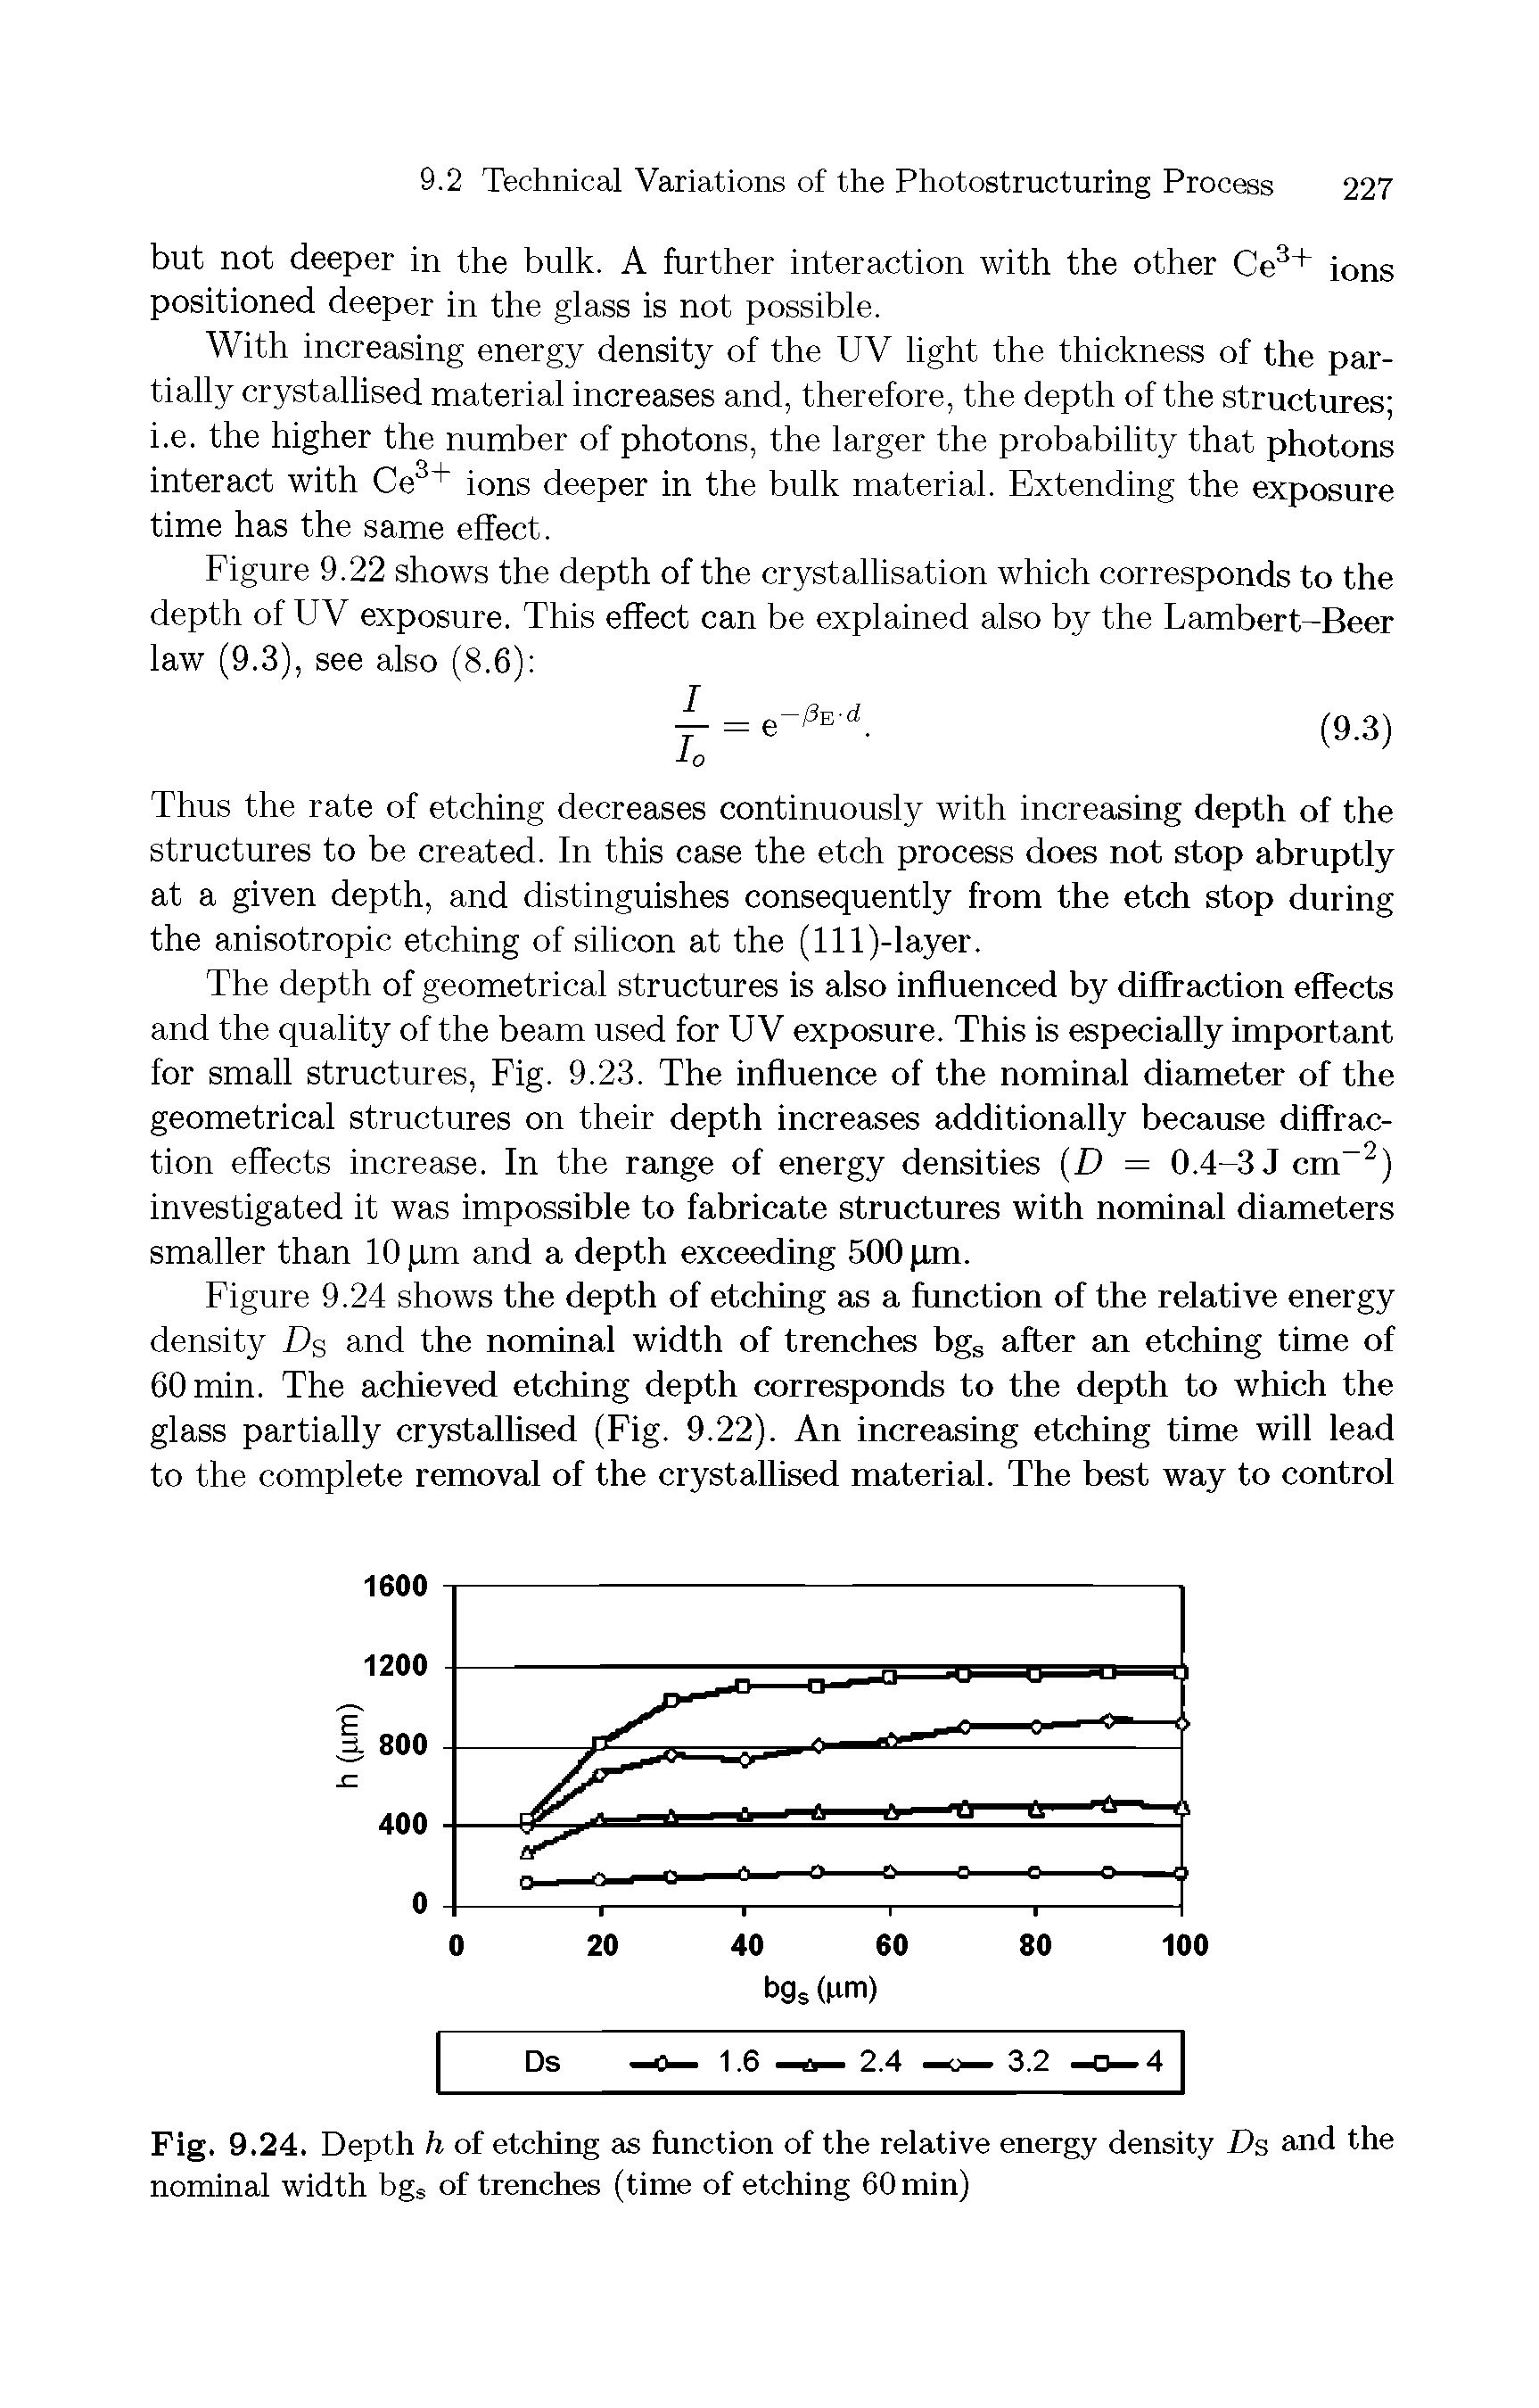 Figure 9.24 shows the depth of etching as a function of the relative energy density Ds and the nominal width of trenches bgs after an etching time of 60 min. The achieved etching depth corresponds to the depth to which the glass partially crystallised (Fig. 9.22). An increasing etching time will lead to the complete removal of the crystallised material. The best way to control...